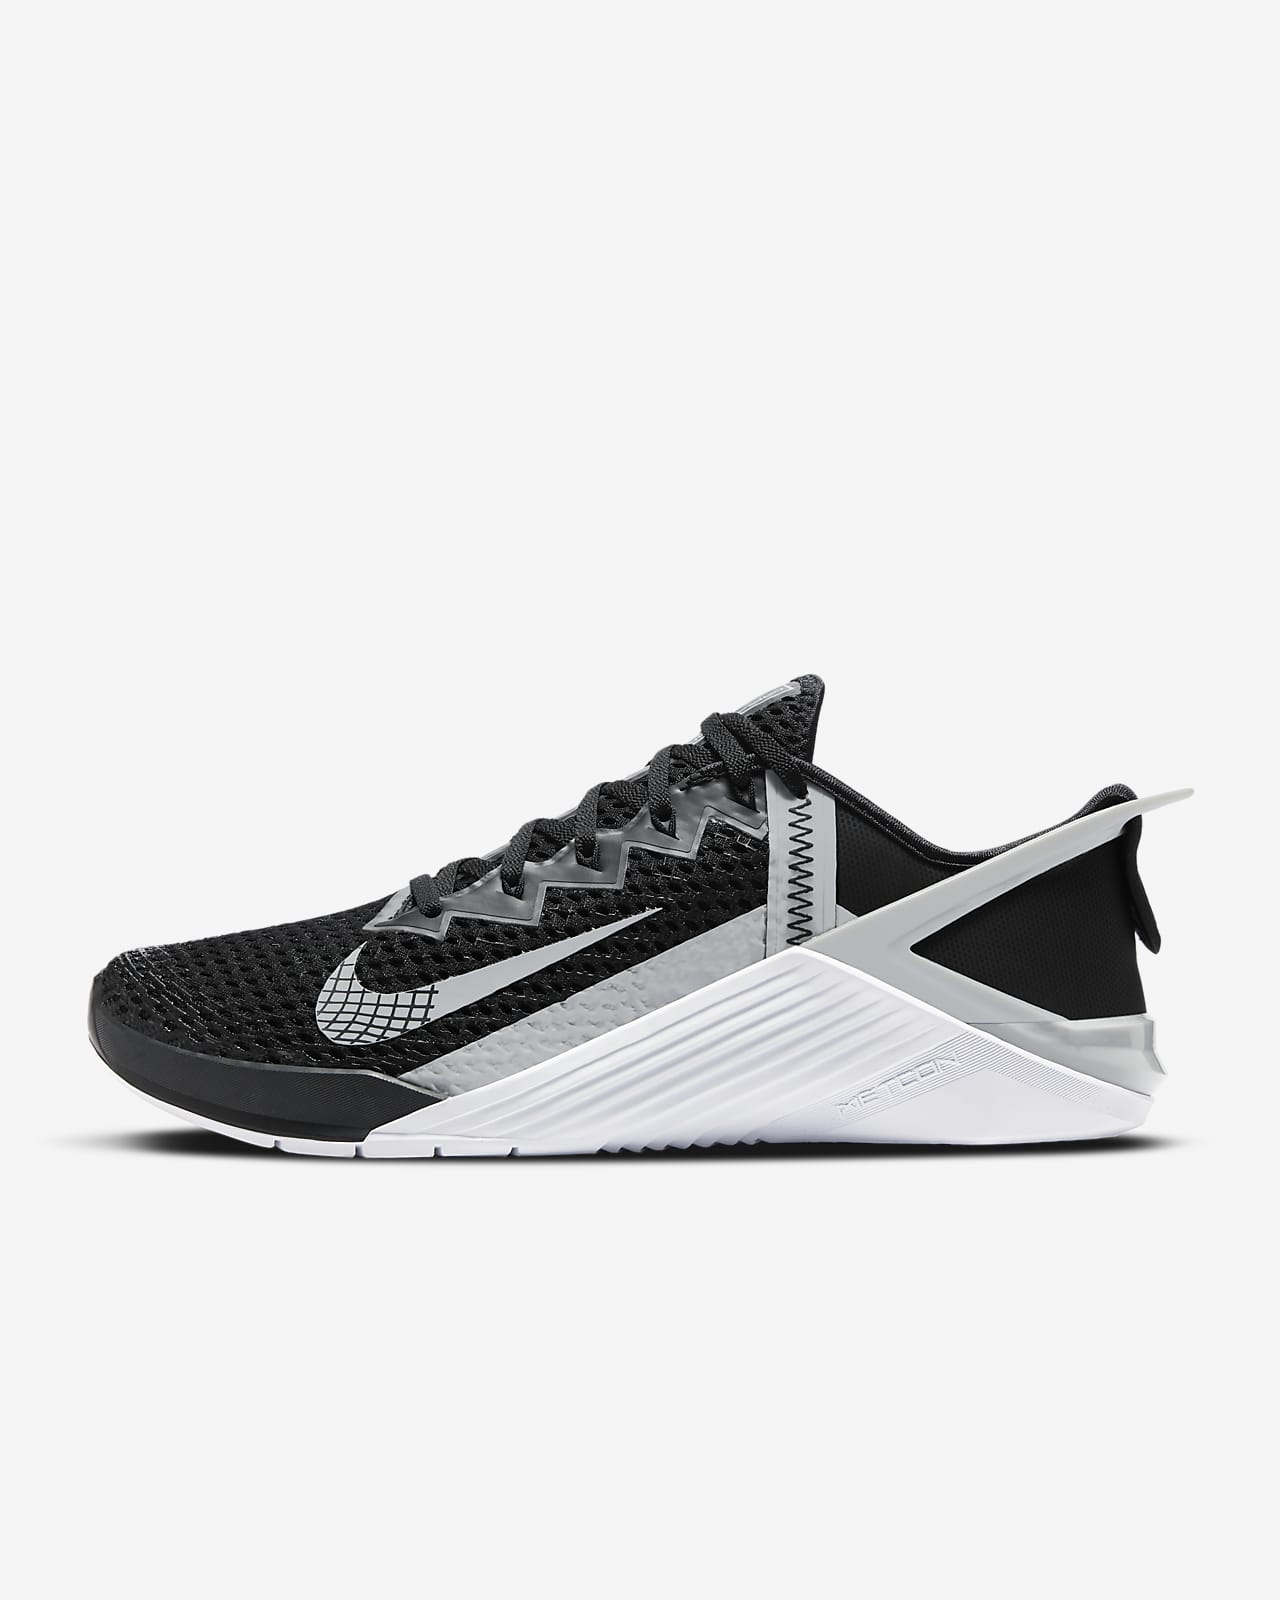 is nike metcon good for running